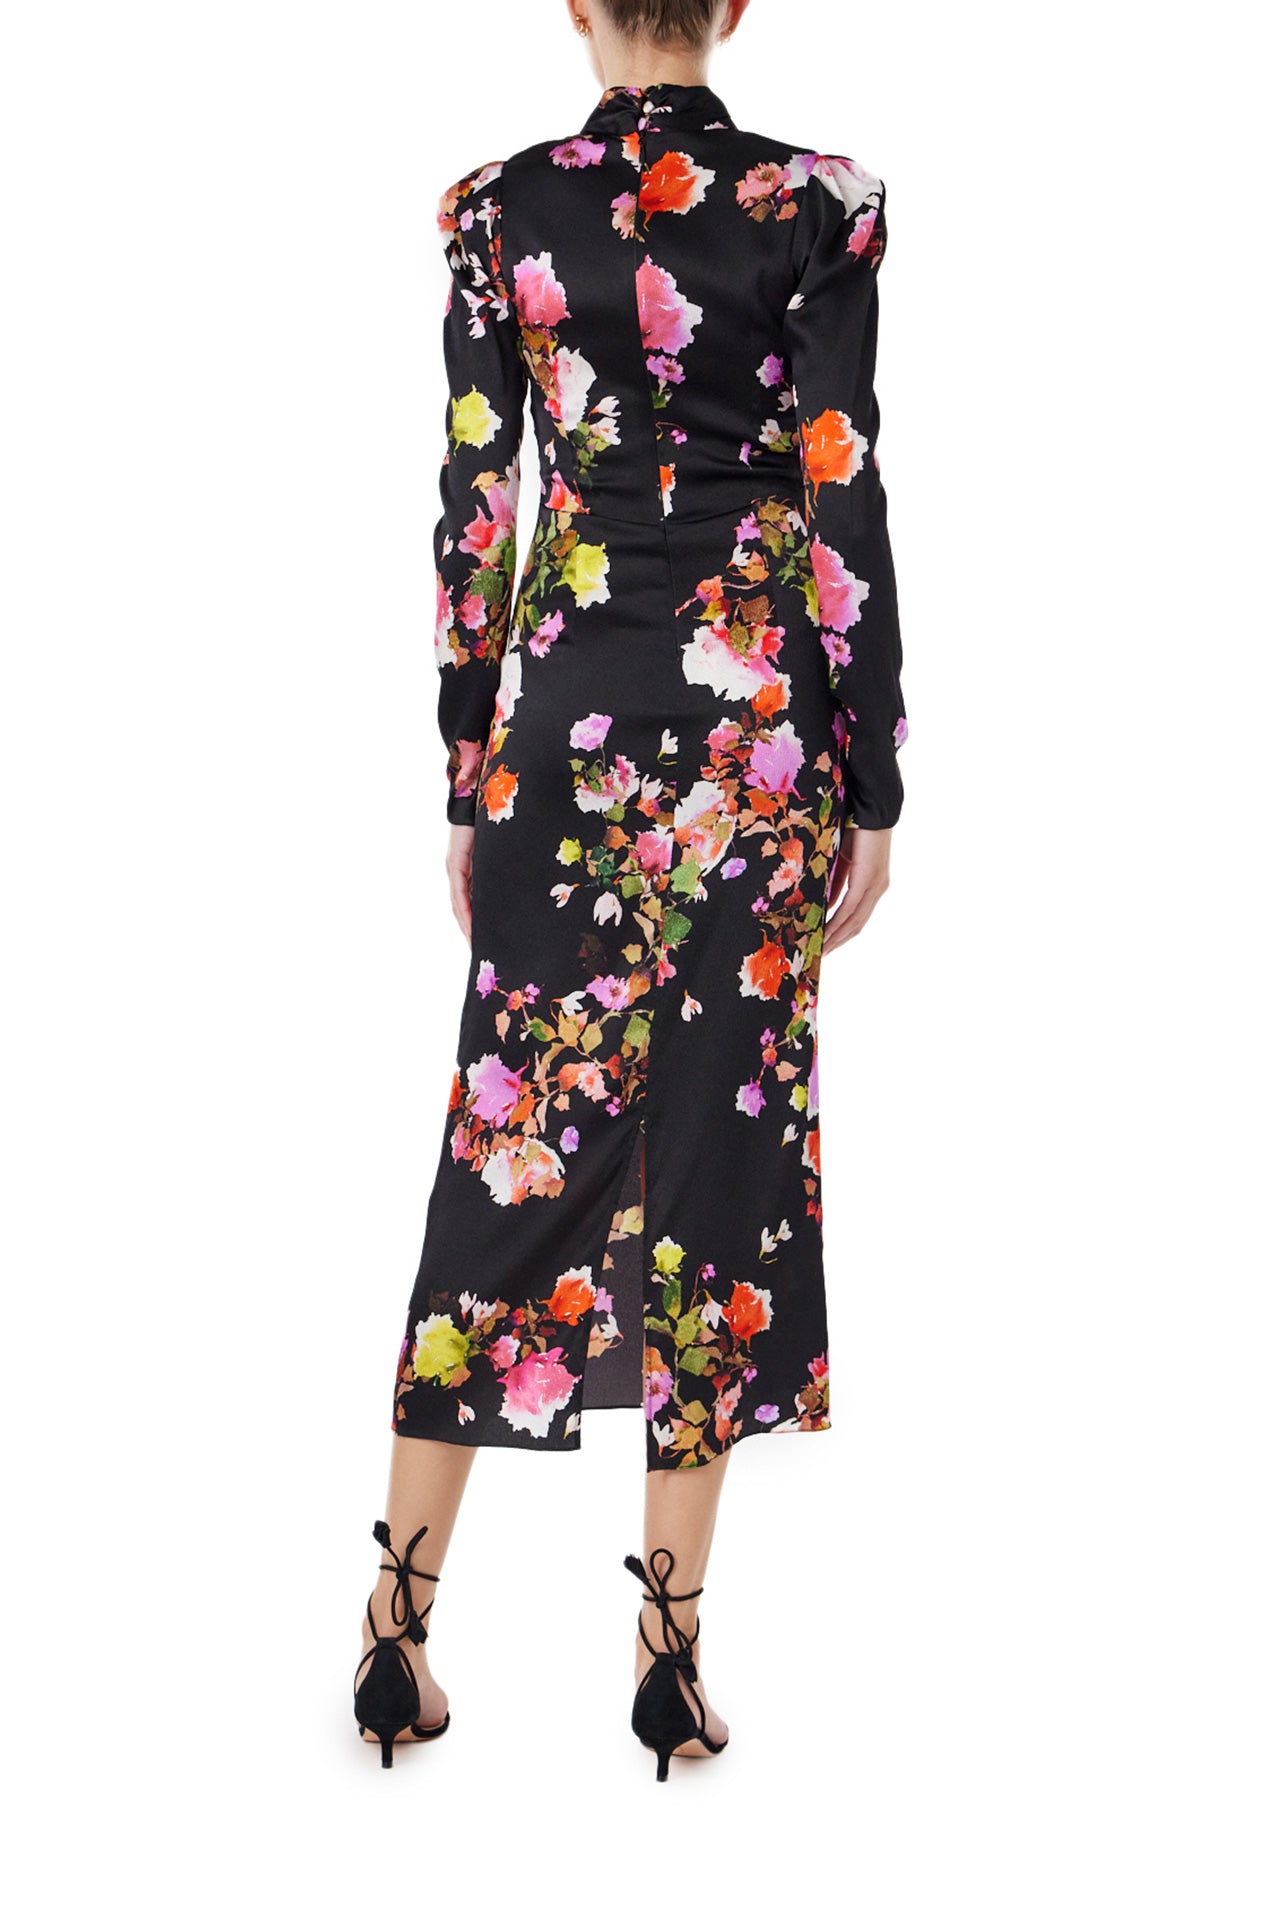 Monique Lhuillier Spring 2024 long sleeve midi dress with high neck and tied front keyhole bodice in black floral hammered silk - back.